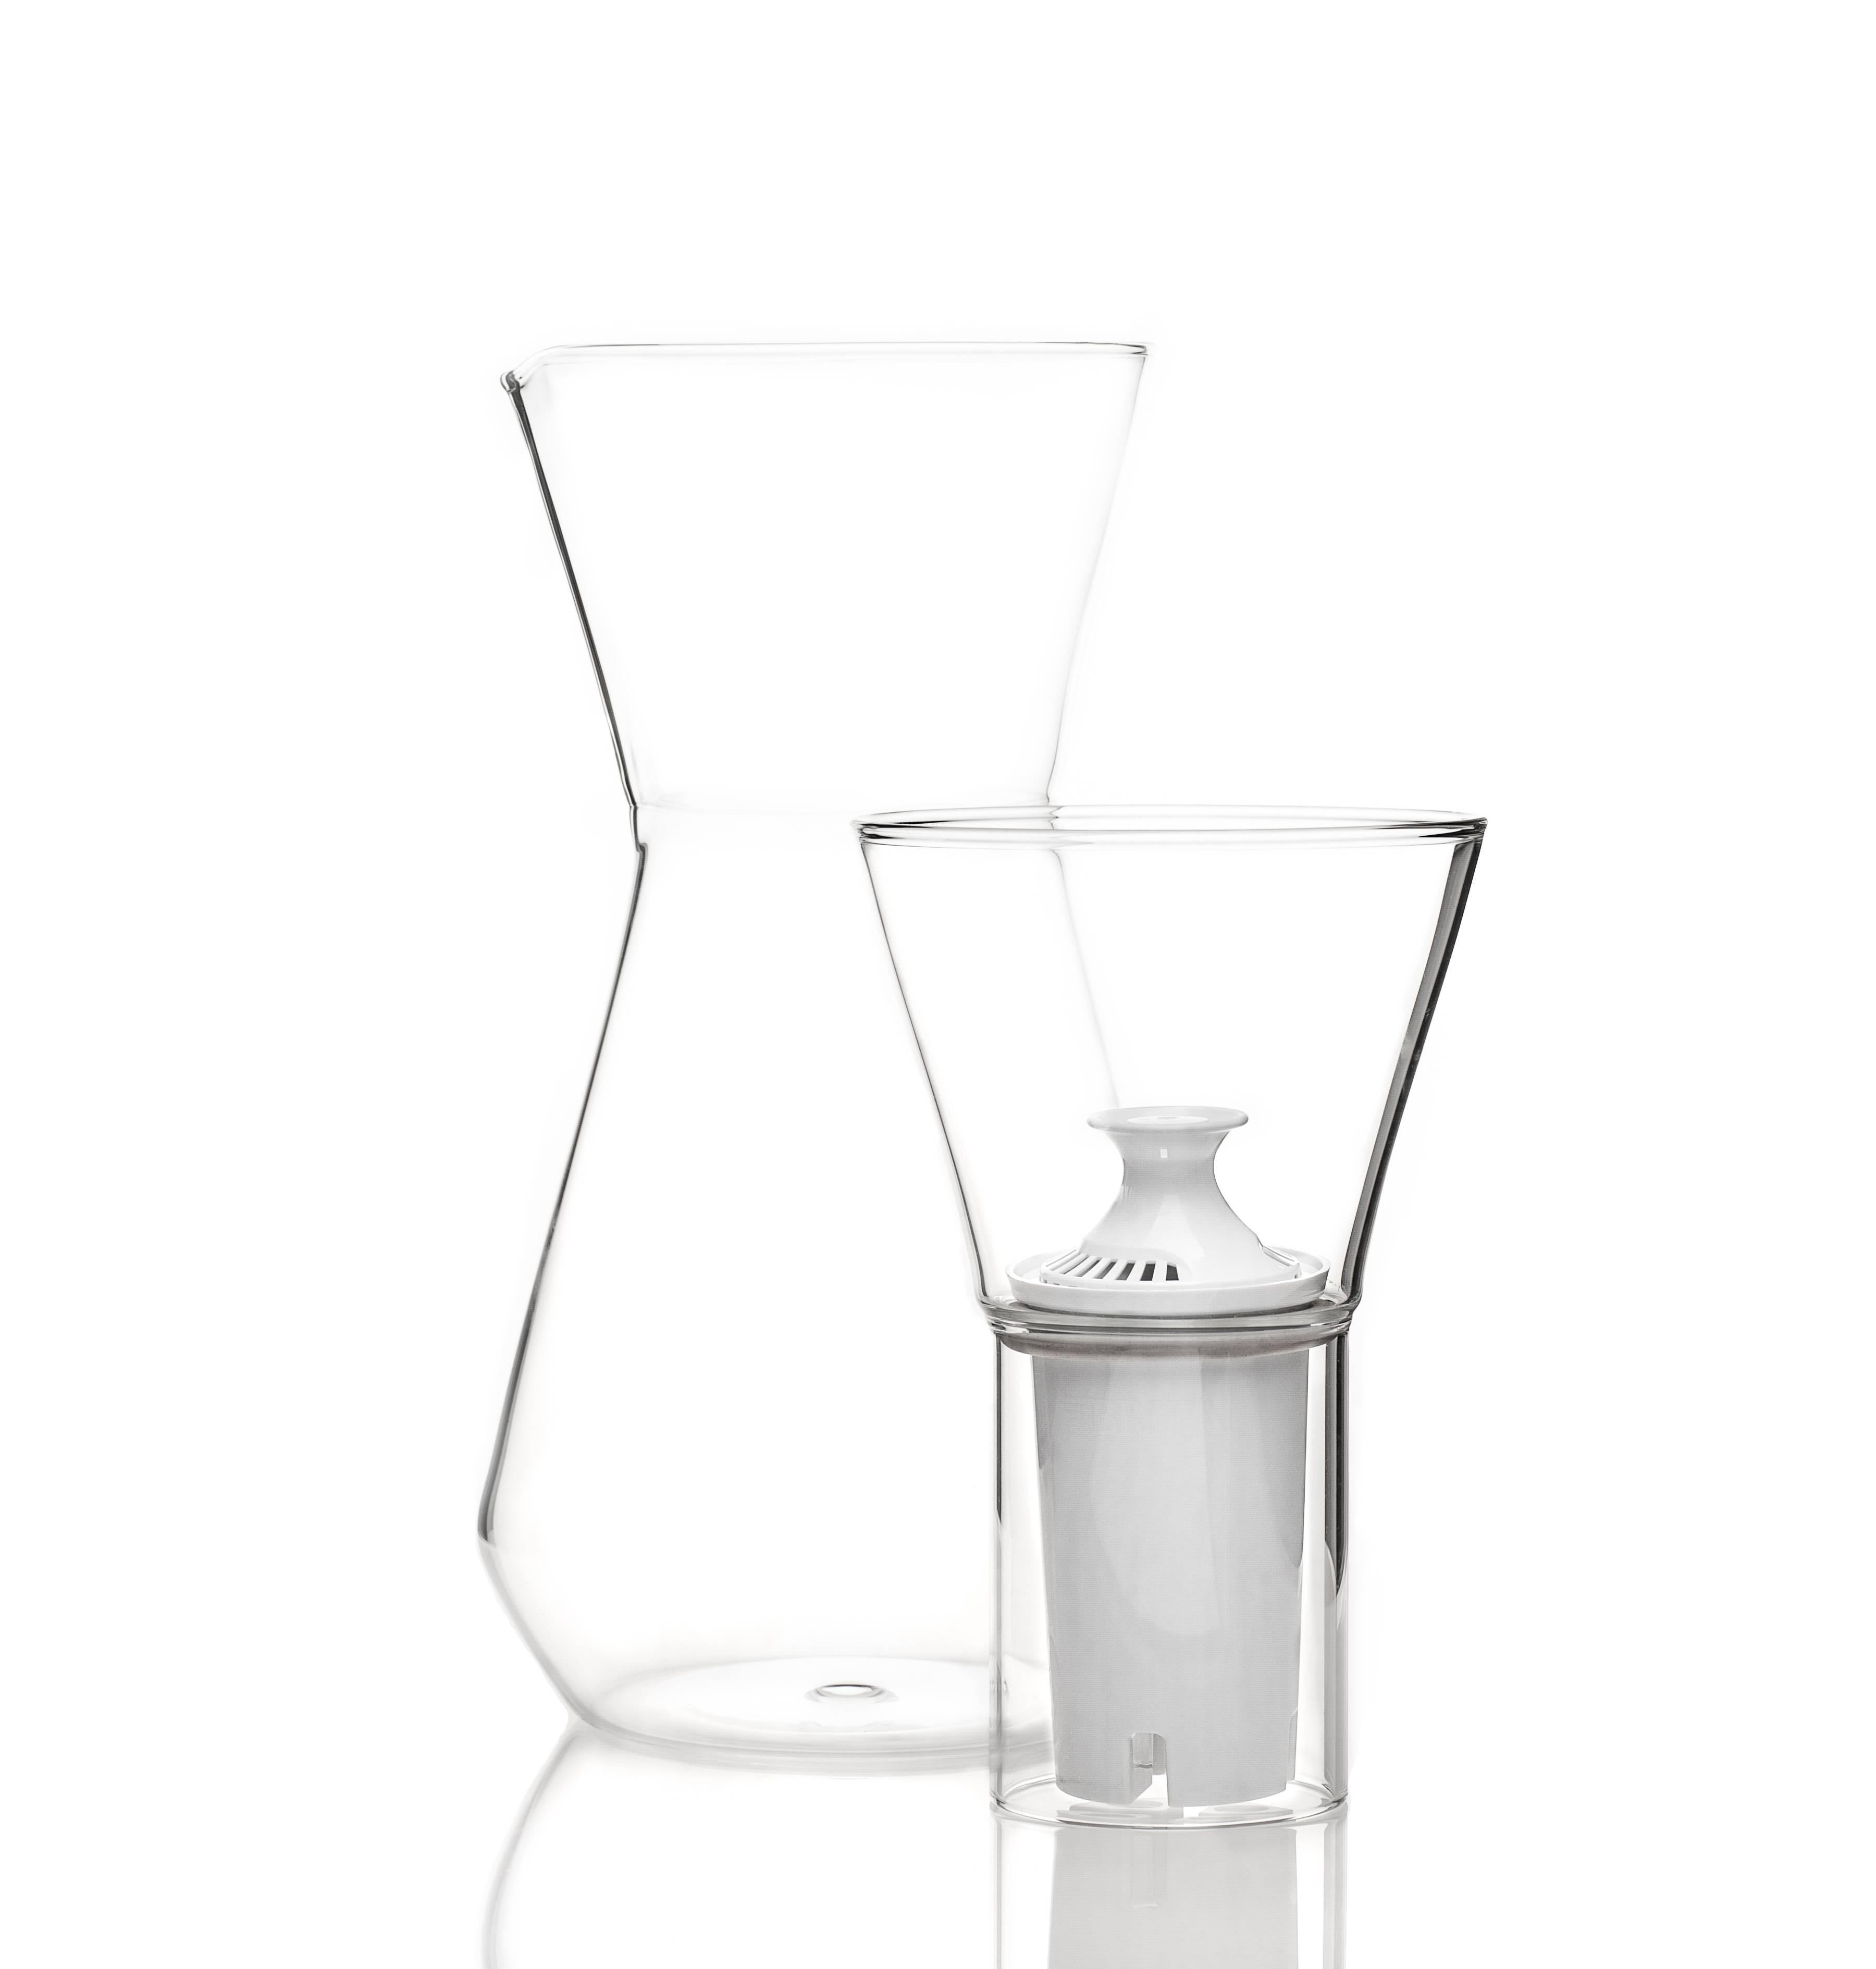 This set includes one Talise Smooth carafe pitcher and six Mixed Small glasses. 

Finding the beauty in a simple, everyday object is one of the joys of life. Be it left out on your counter or table the Talise can be used with the funnel for water or